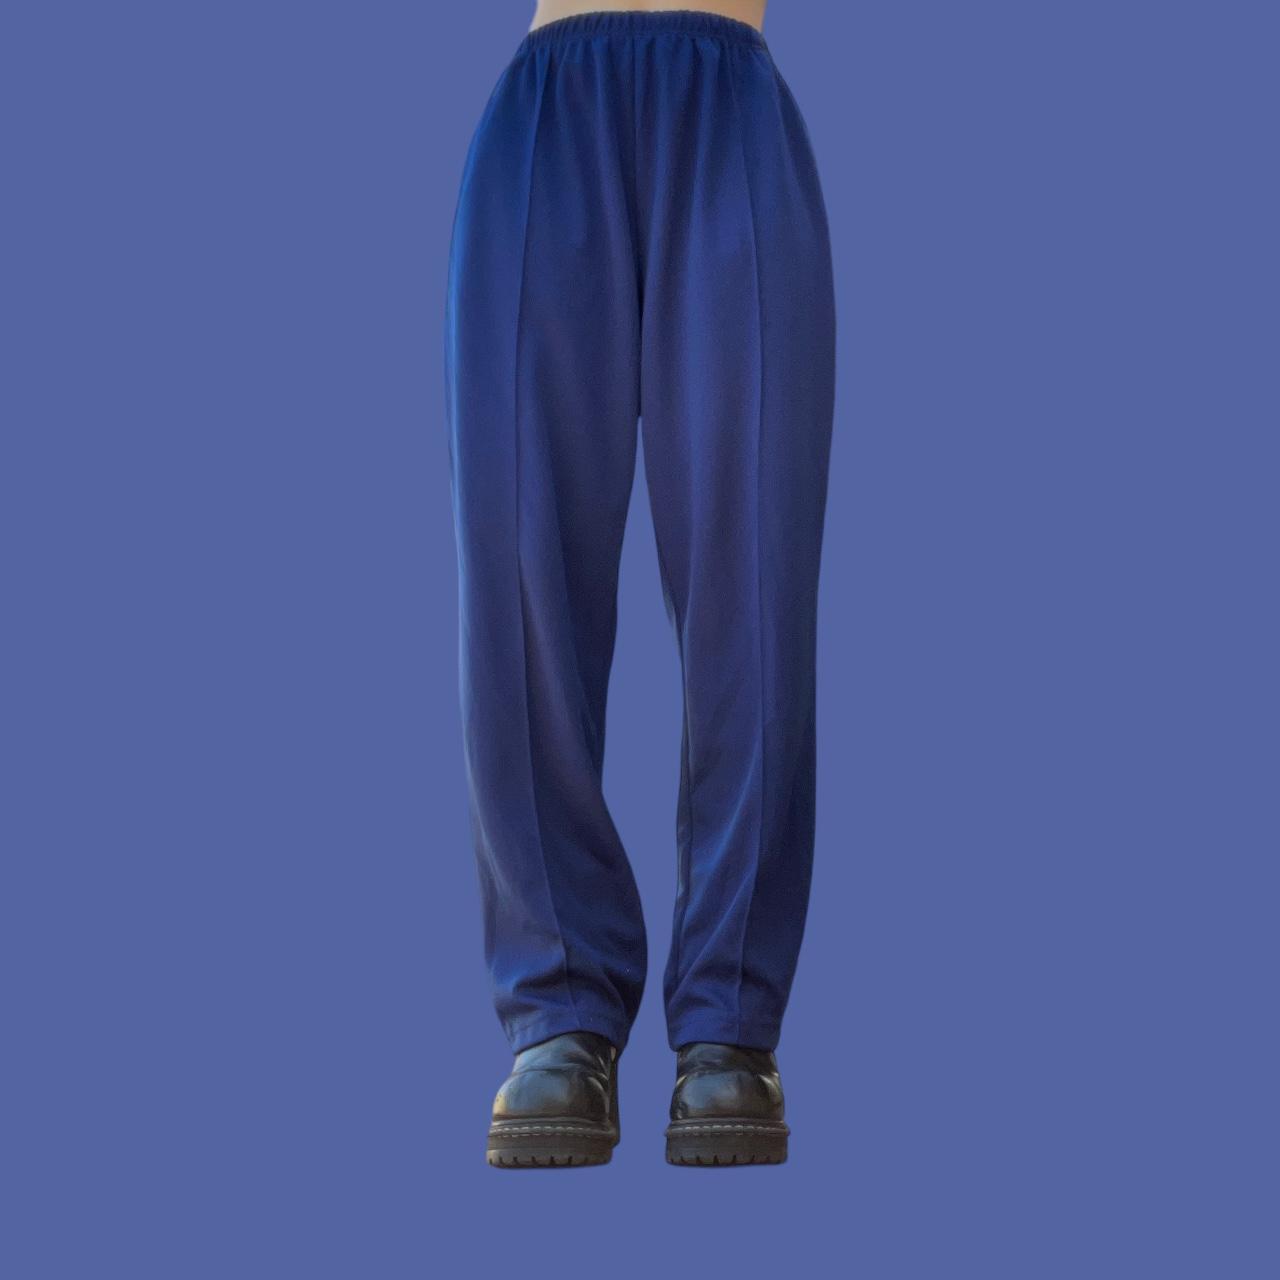 Gorman Women's Blue and Navy Trousers